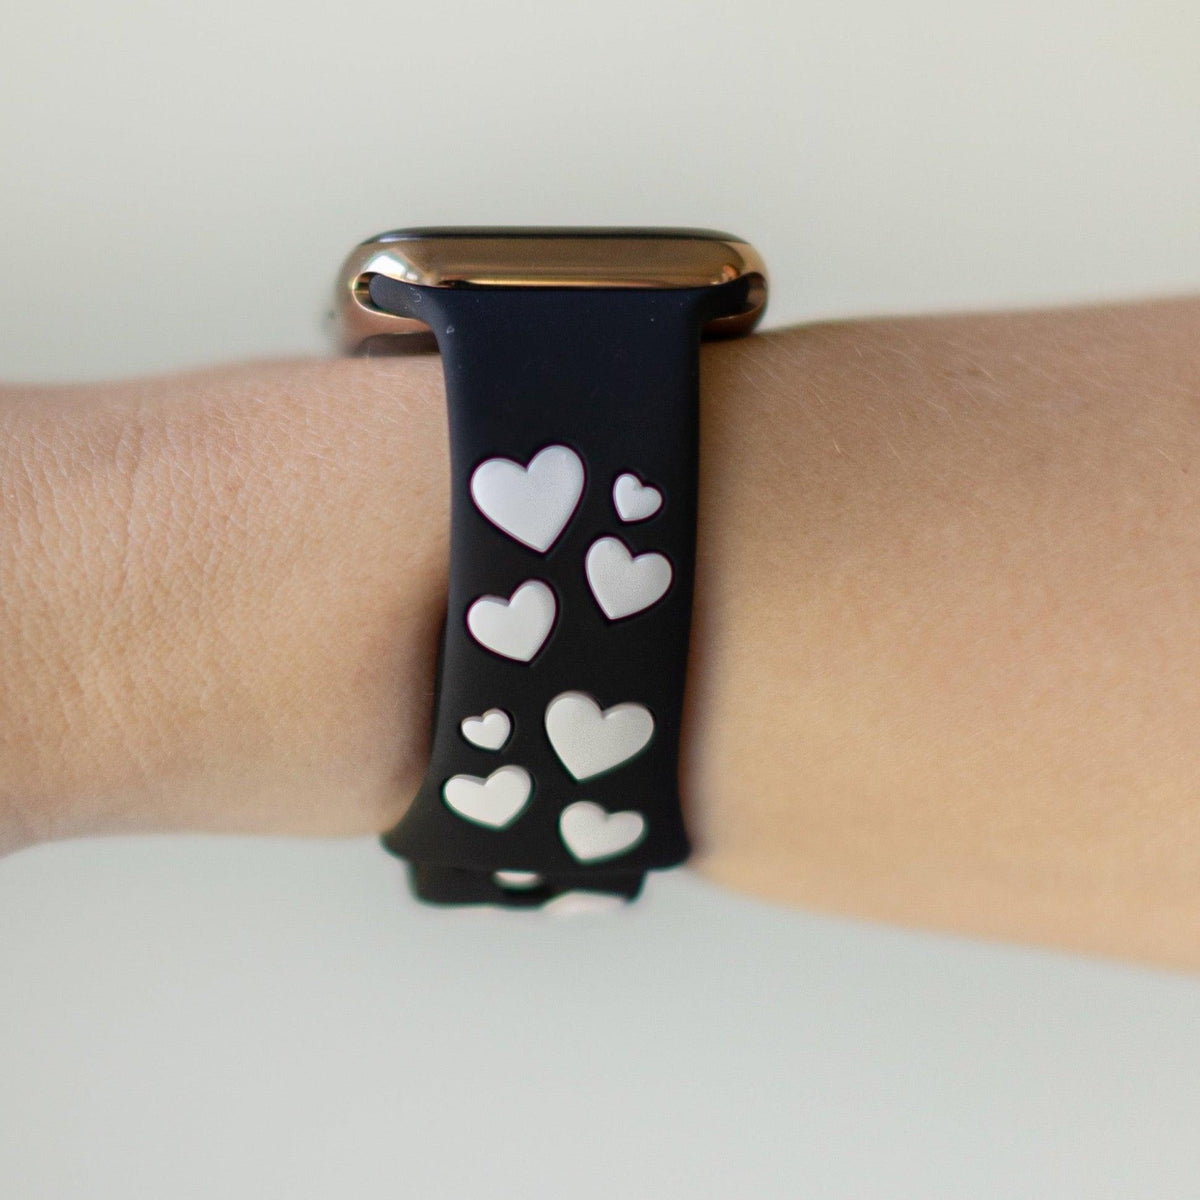 Black & White Love & Luxe Apple Watch Band - Strawberry Avocados